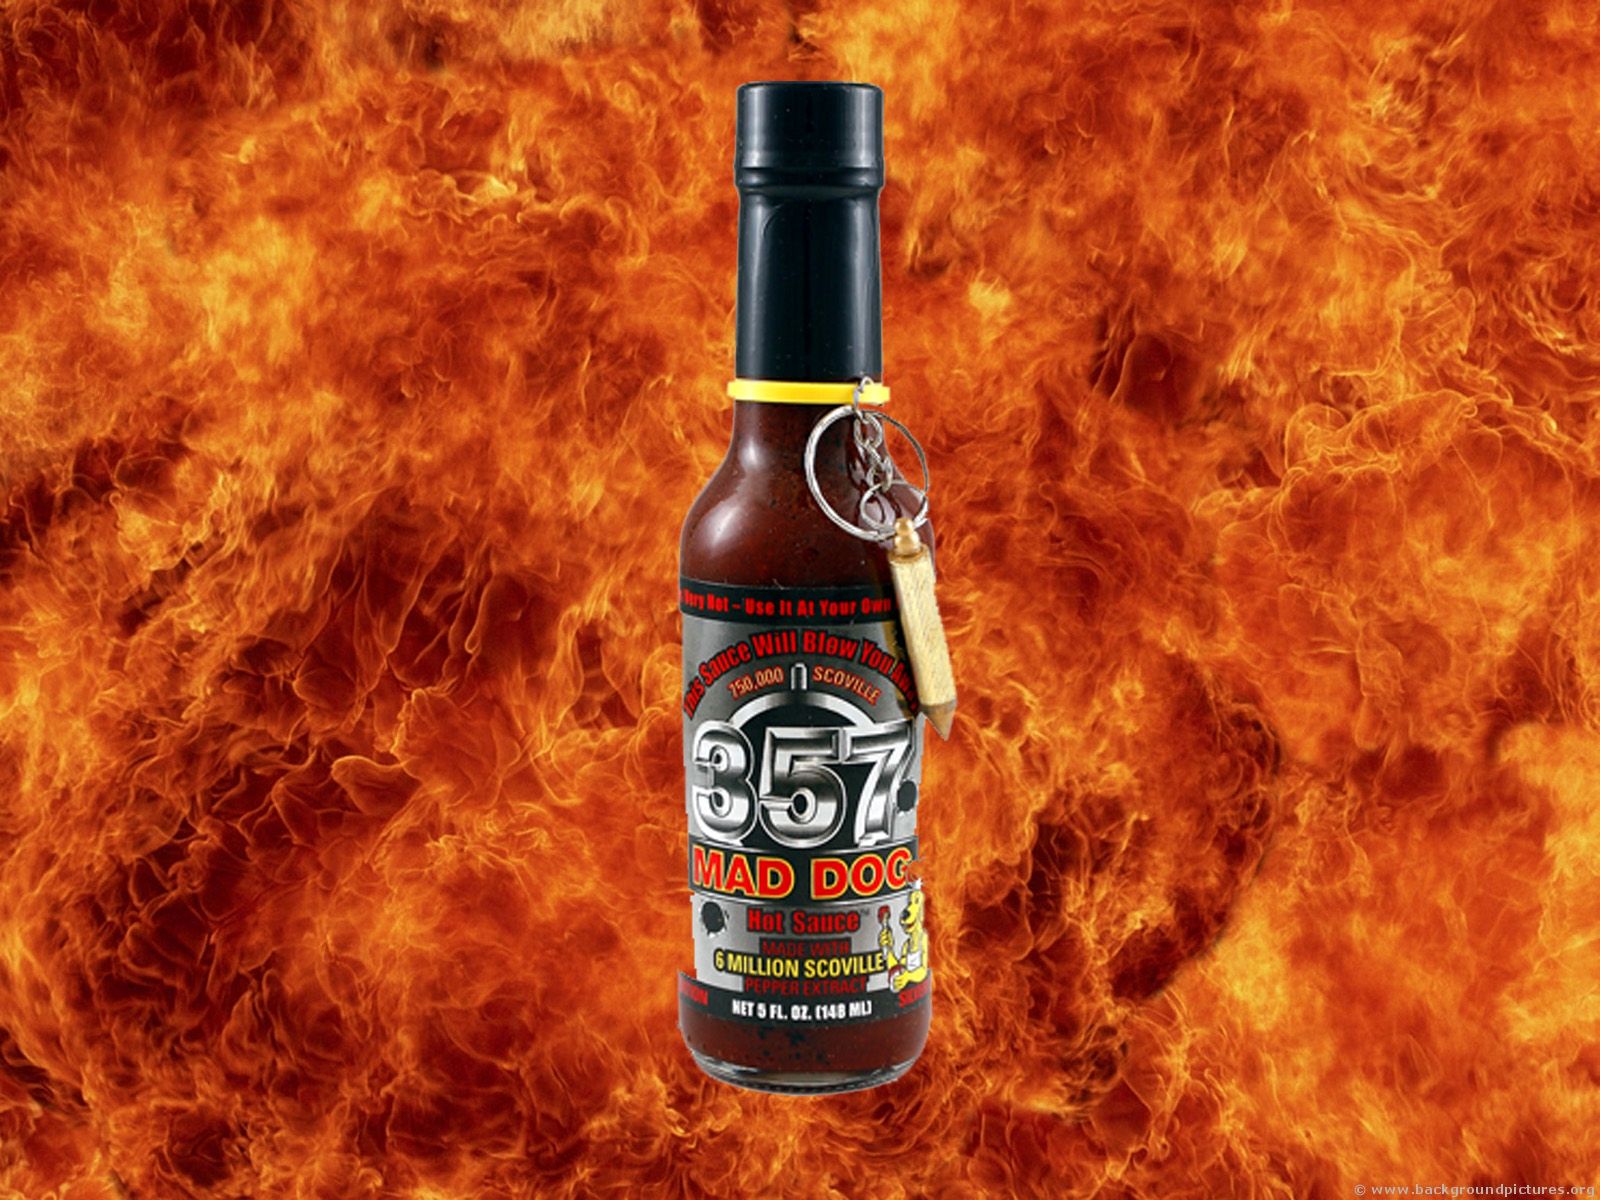 Free download Mad Dog 357 Silver hot sauce review Review Spew